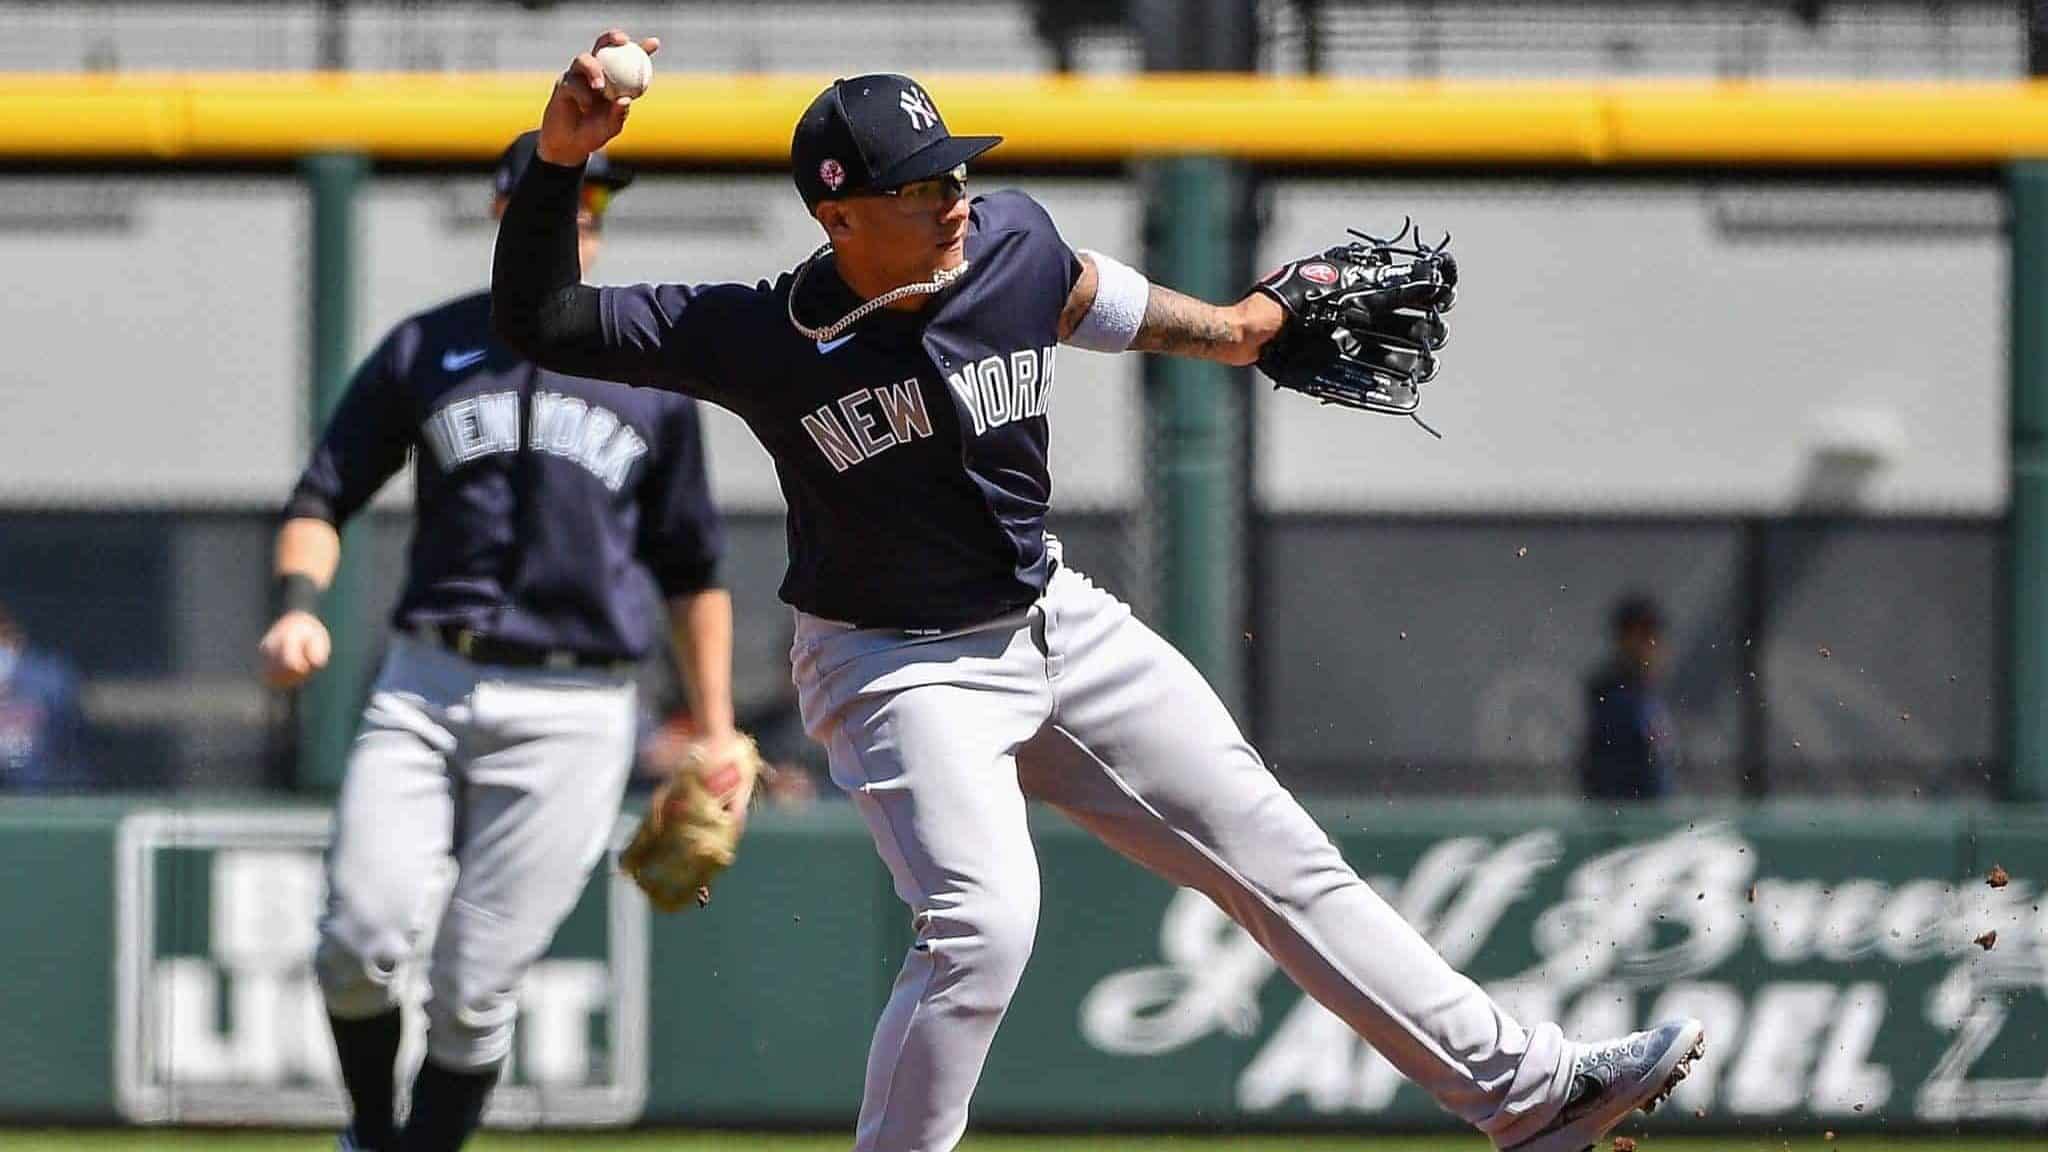 VENICE, FLORIDA - FEBRUARY 28: Gleyber Torres #25 of the New York Yankees makes the throw to first base in the first inning during the spring training game against the Atlanta Braves at Cool Today Park on February 28, 2020 in Venice, Florida.